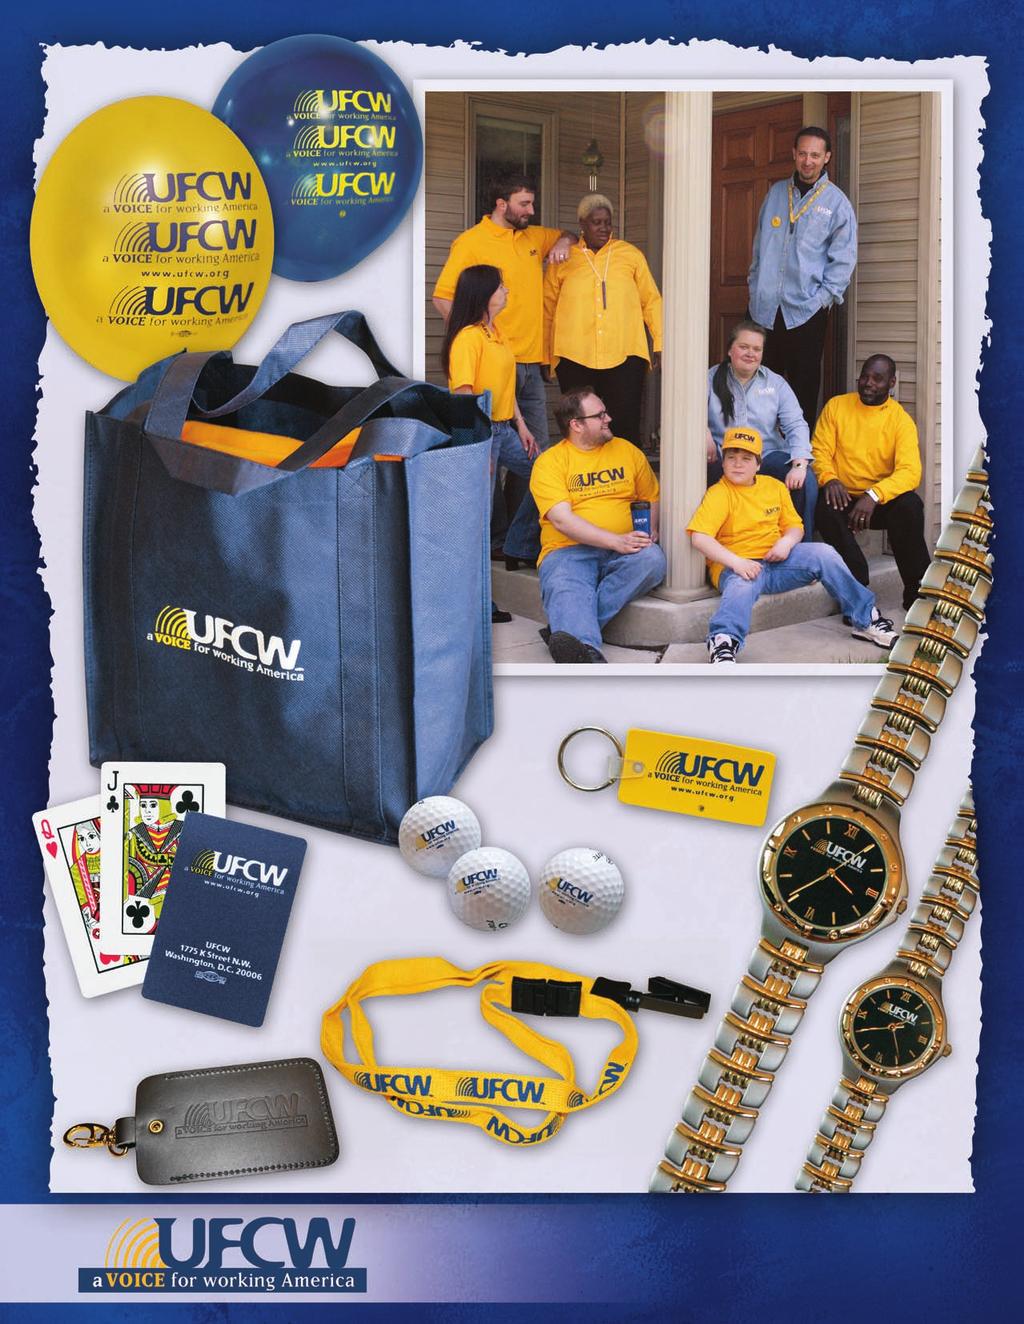 A alloons Gold - UFCW 6008 lue - UFCW 6007 Eco-Tote - 14 x 12 W x 8 eep - UFCW 6015 C Key Ring UFCW